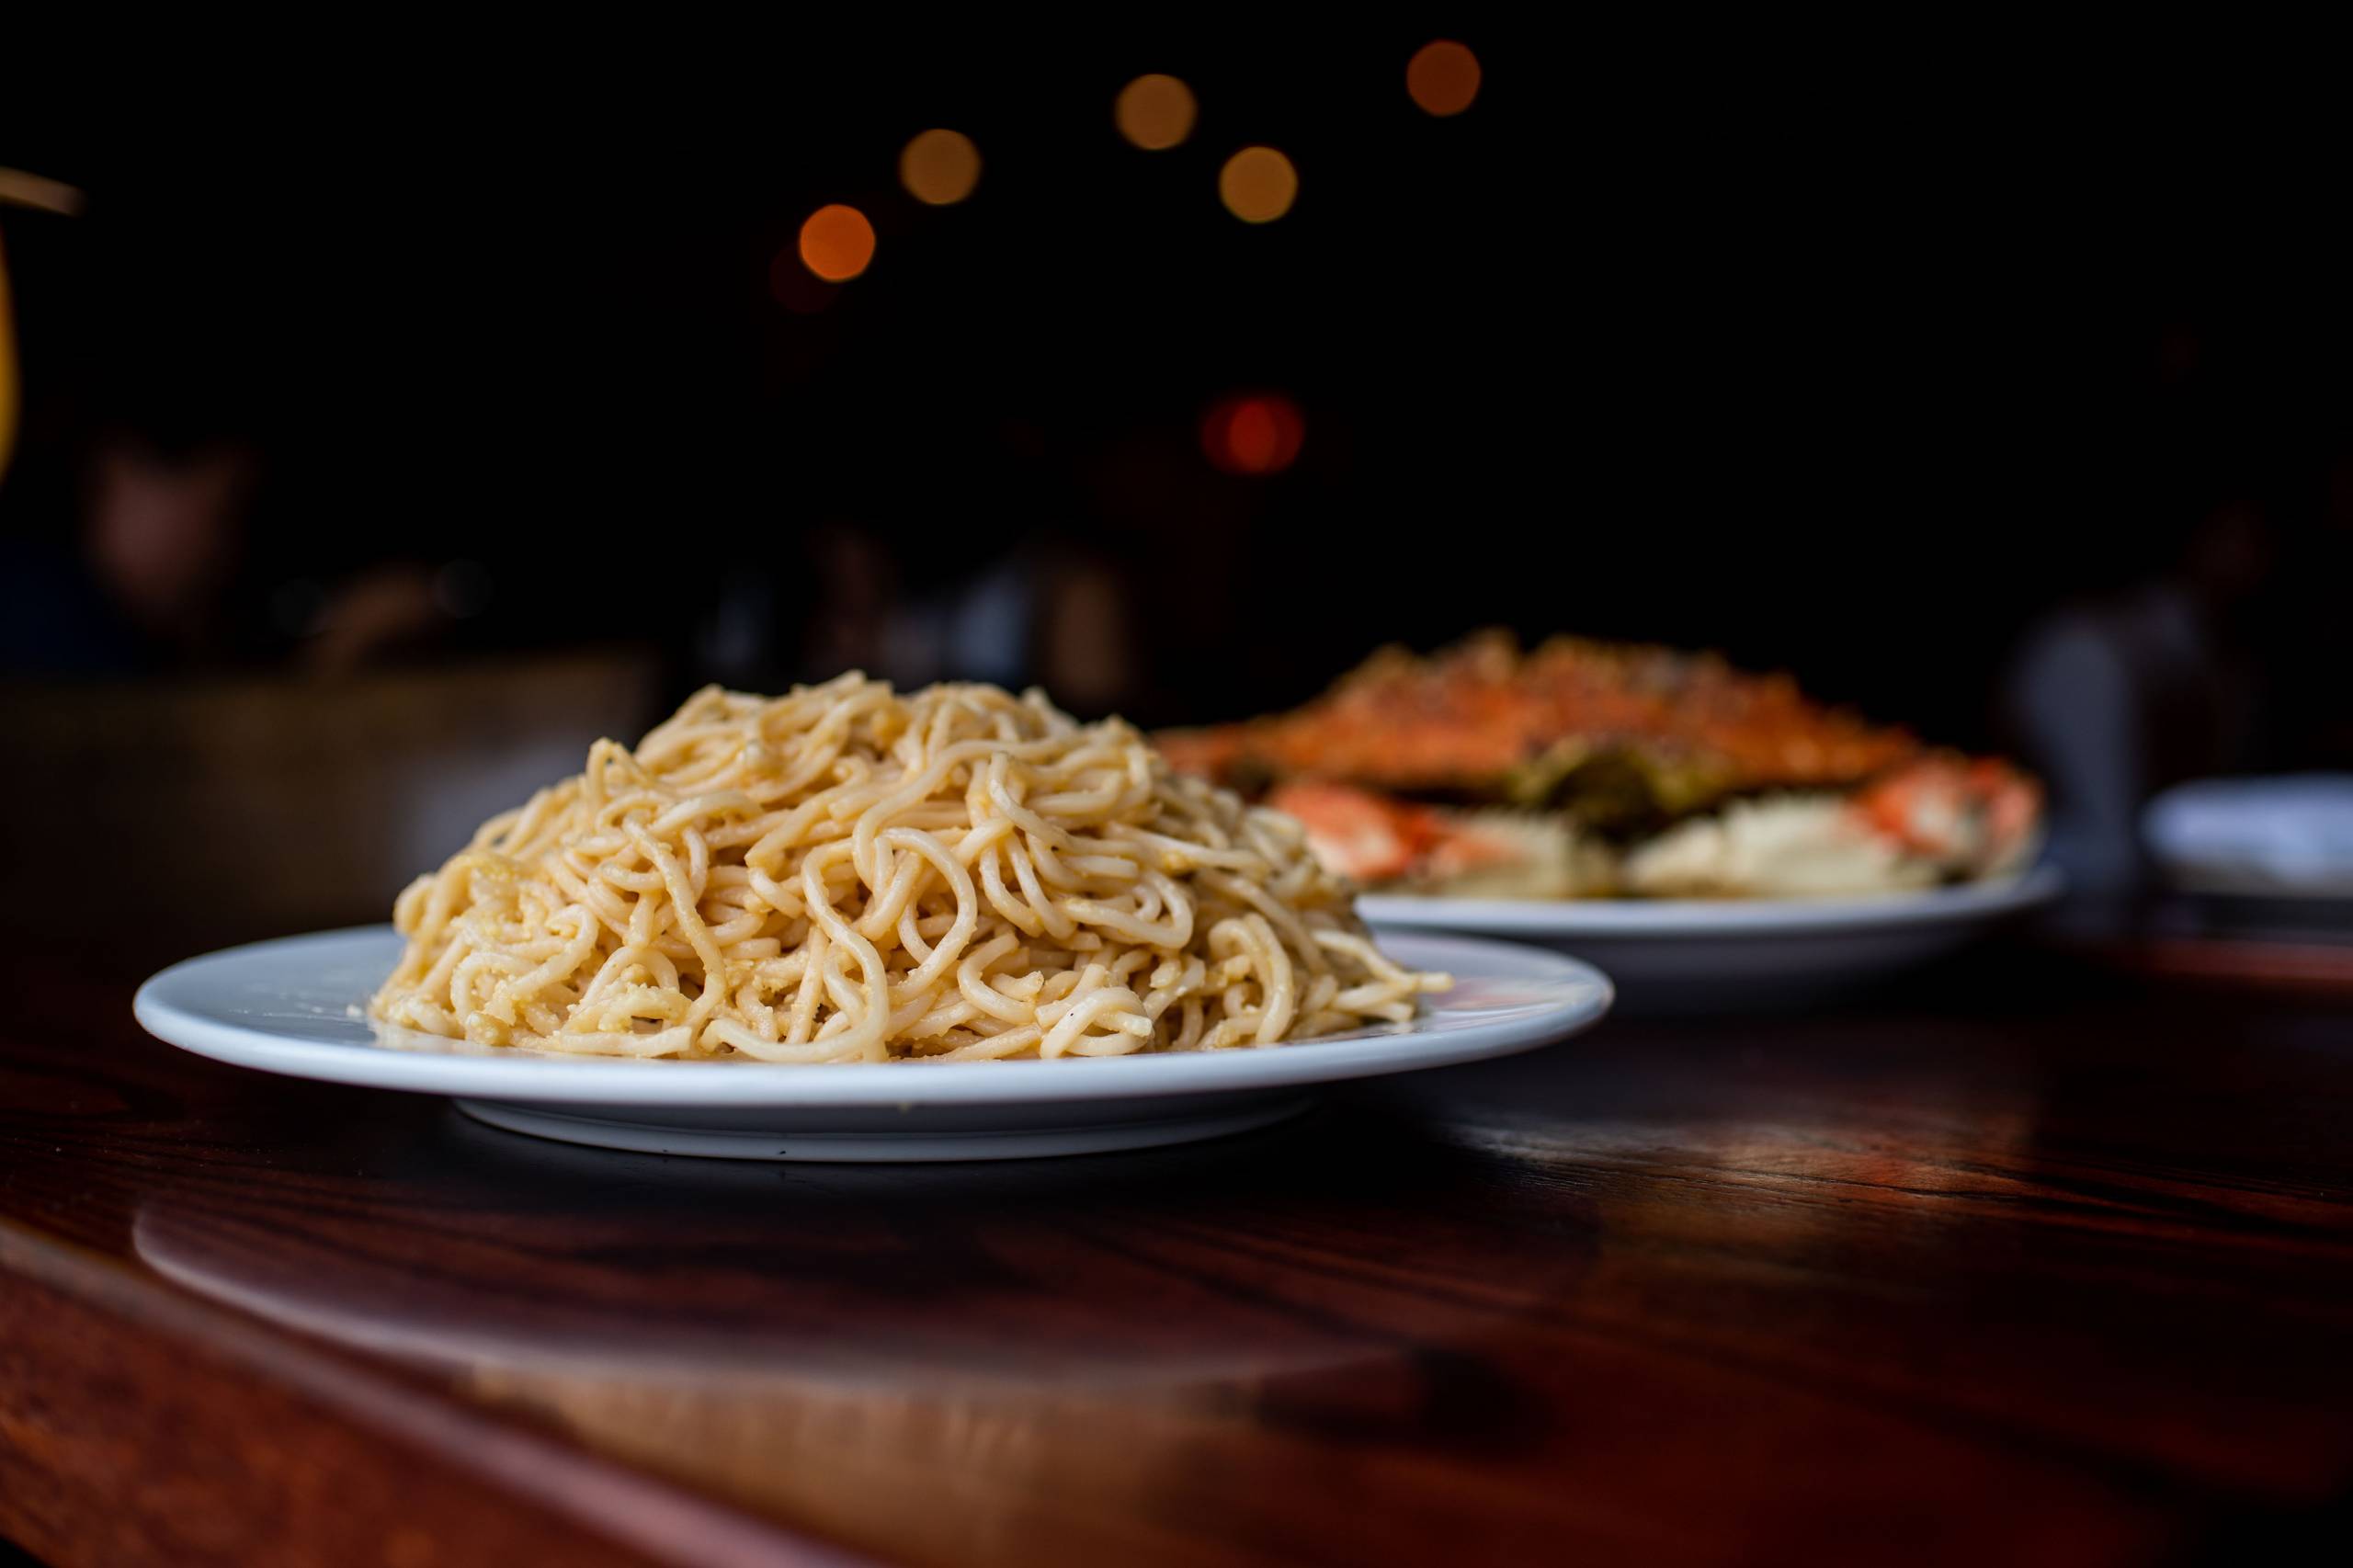 A plate piled high with garlic noodles on a table, in front of a plate of whole roast crab.